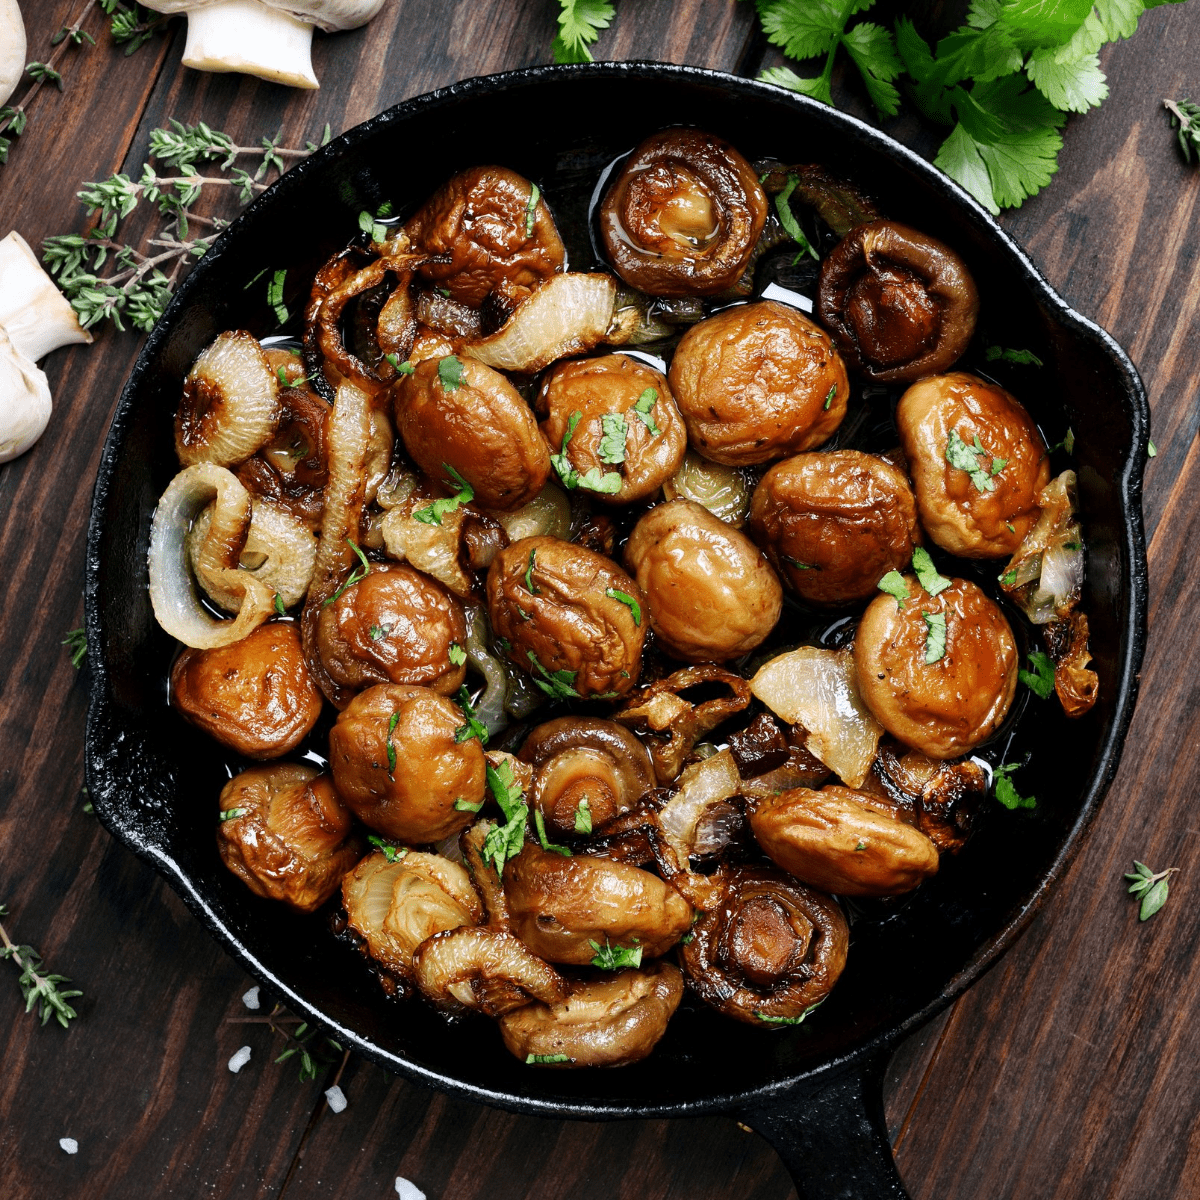 Cooked button mushrooms in a cast iron skillet on a wooden surface with whole white mushrooms and fresh parsley in the background.